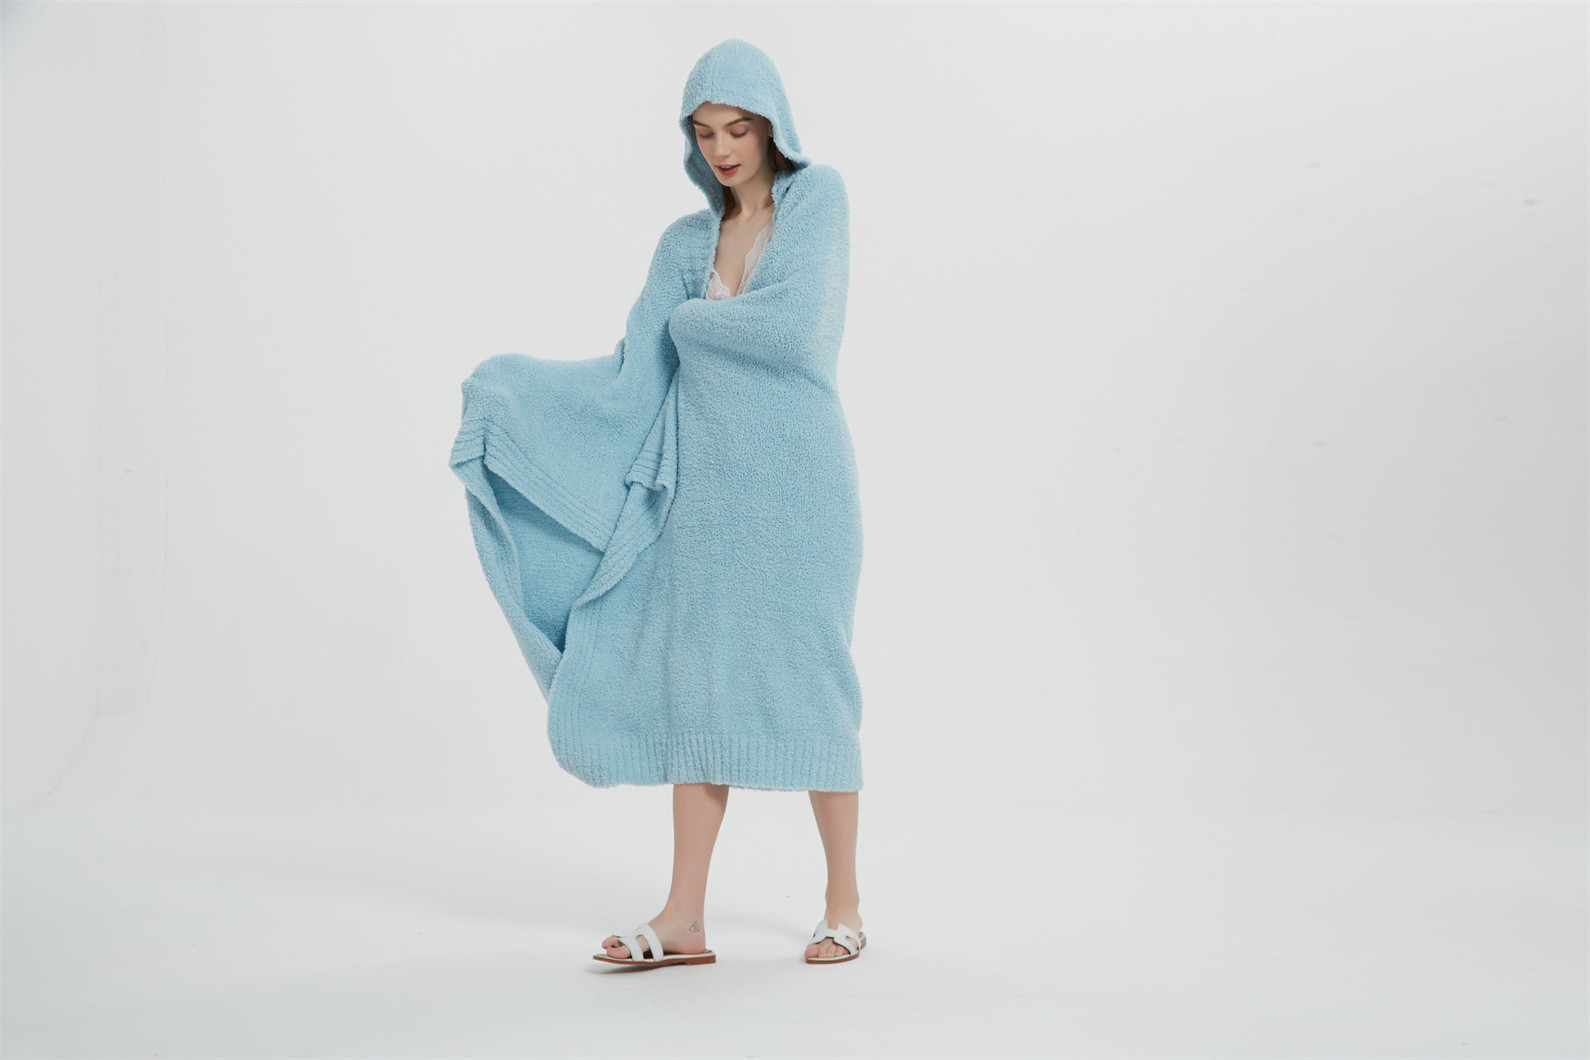 Warm Cozy Microfiber Wearable Sweater Blanket-----The Warmth Of Wearing On The Body